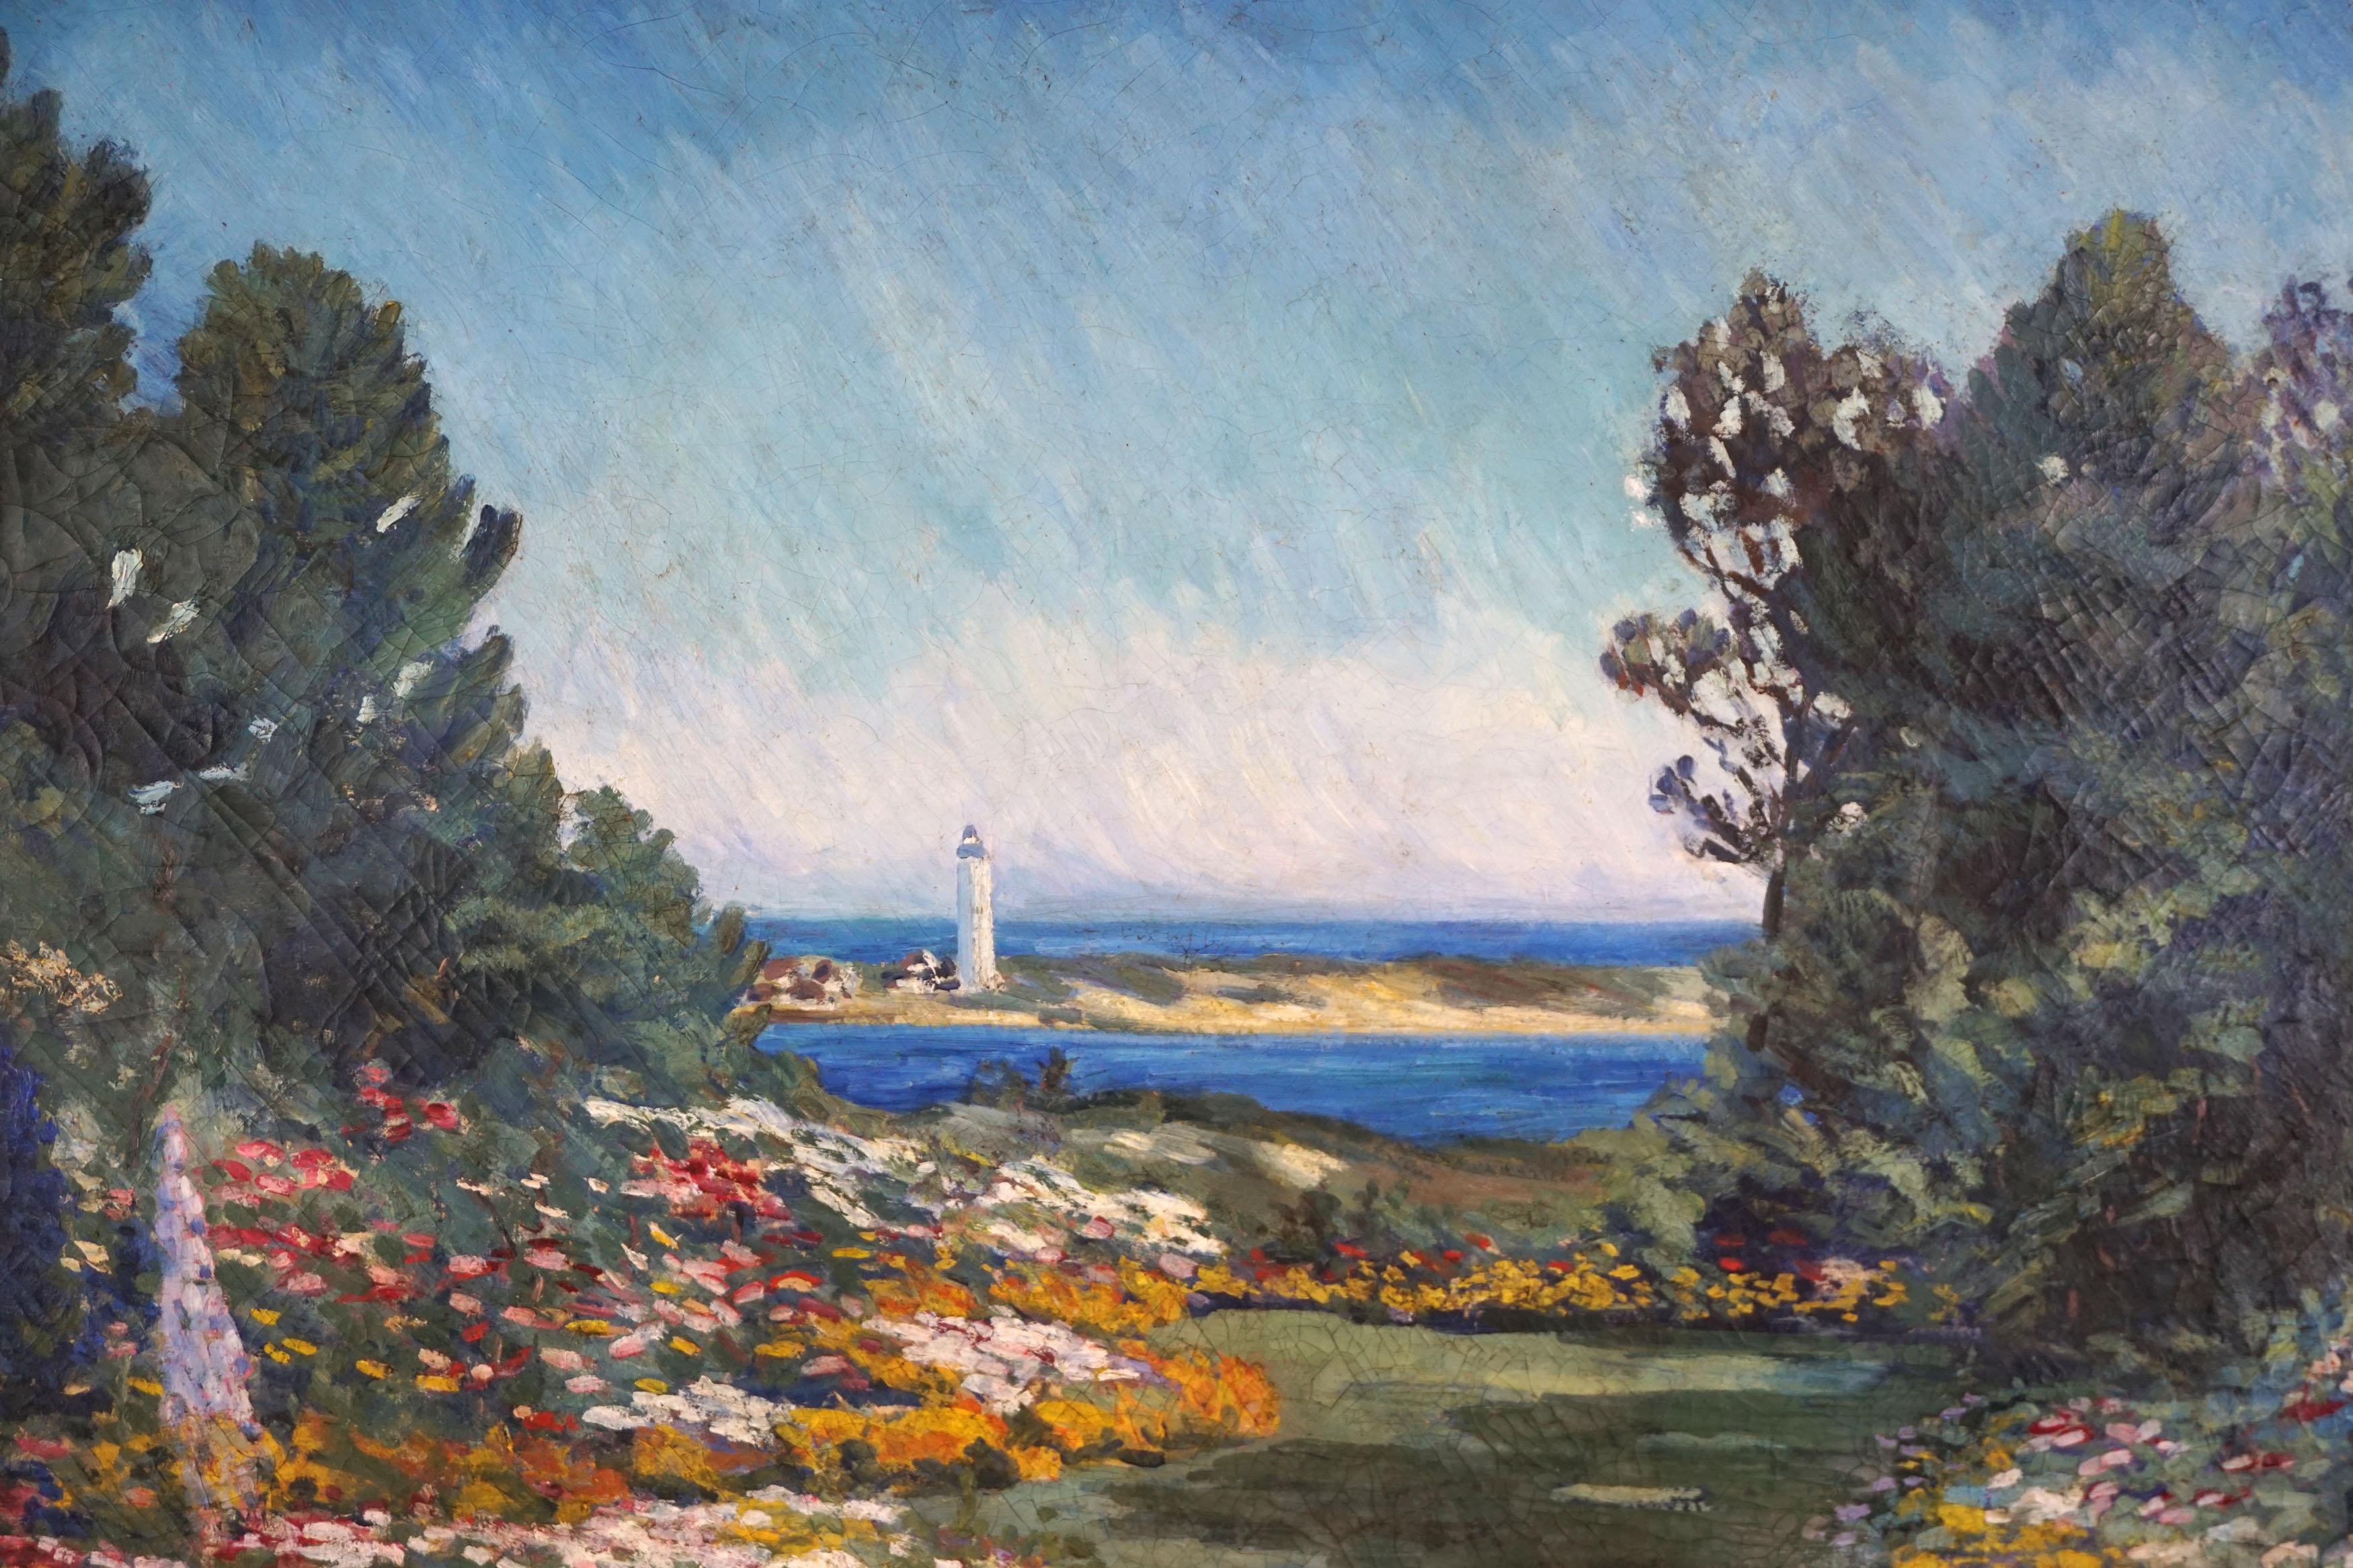 Large Scale 19th Century American Impressionism Garden and Lighthouse Landscape - Painting by 19th century American School